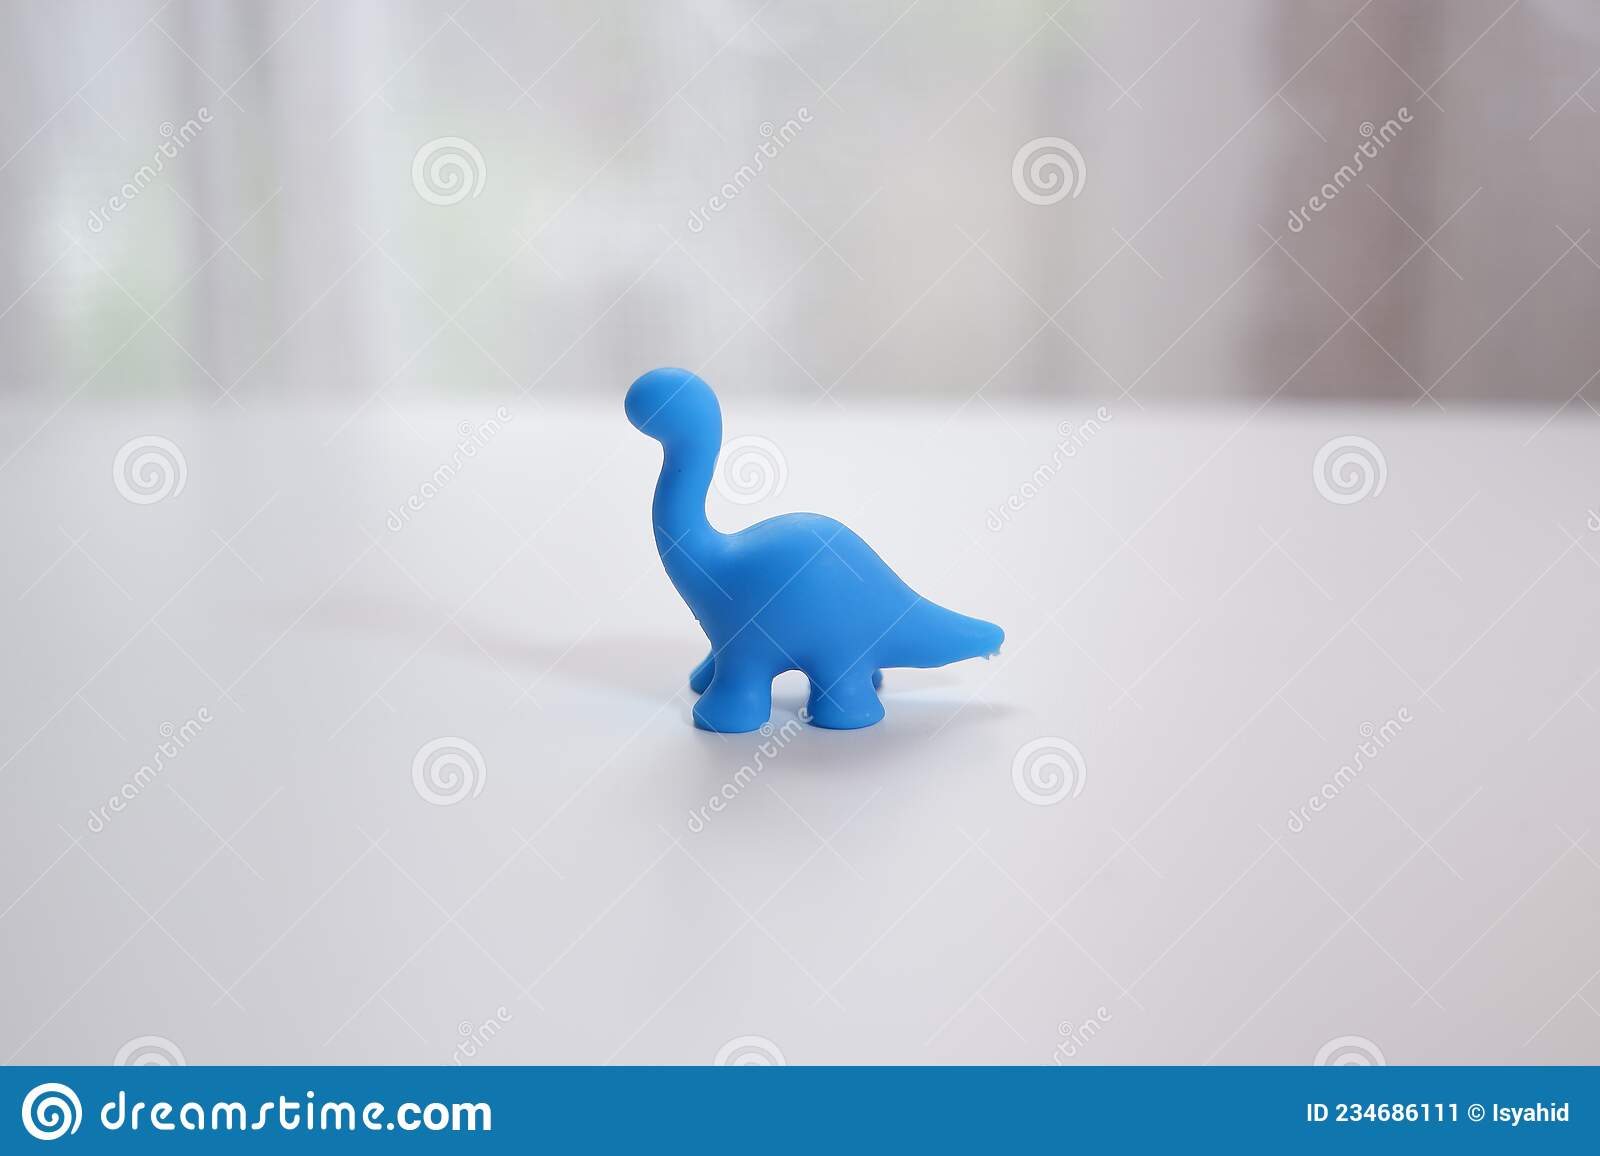 Photo of dinosaur toys with various colors stock image